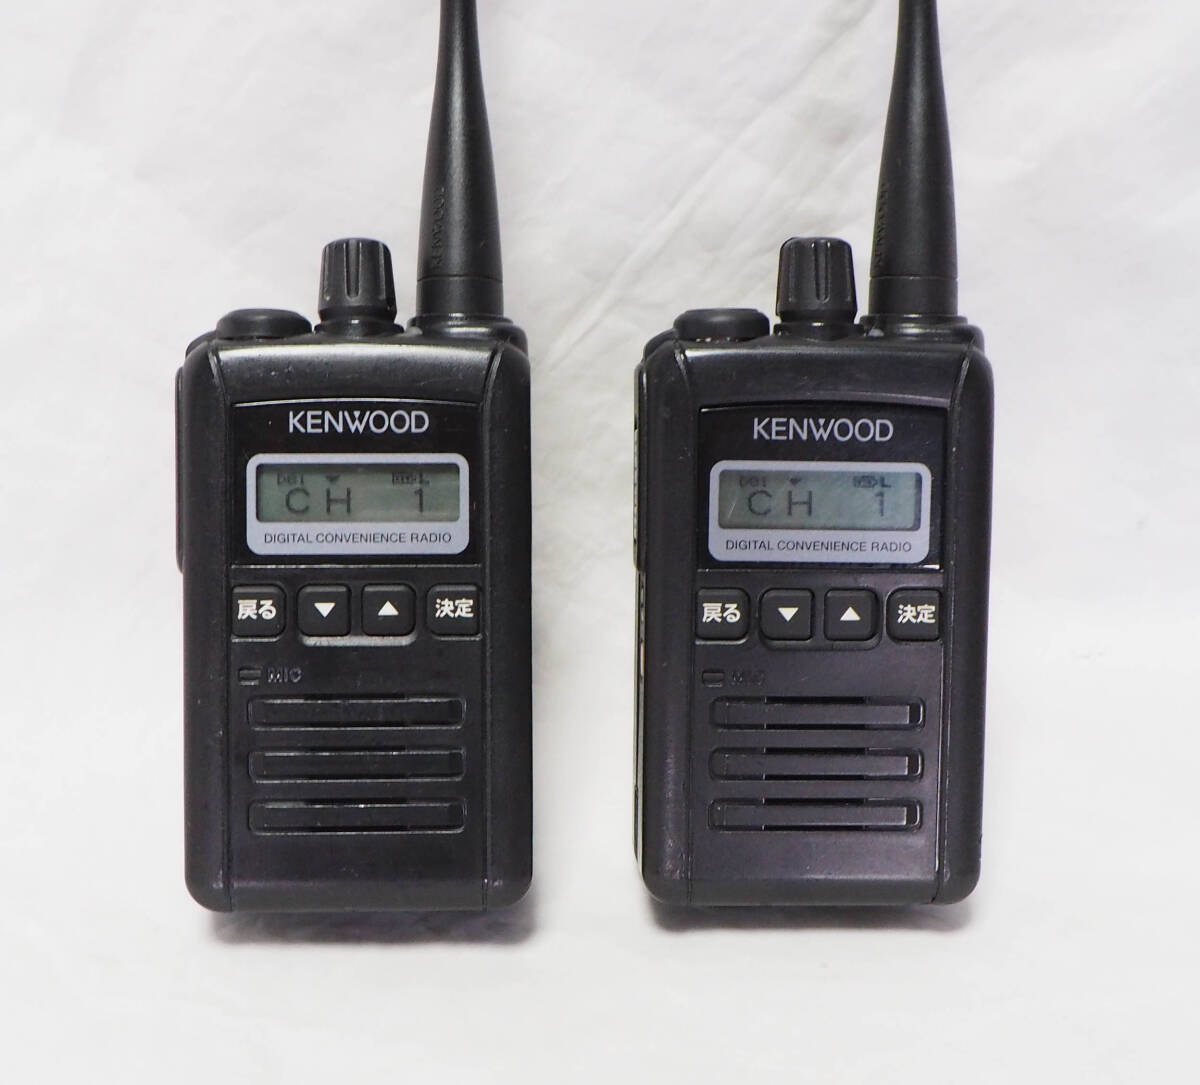  normal operation *KENWOOD Kenwood TCP-D251C 5W digital simple wireless 2 pcs. set with charger 